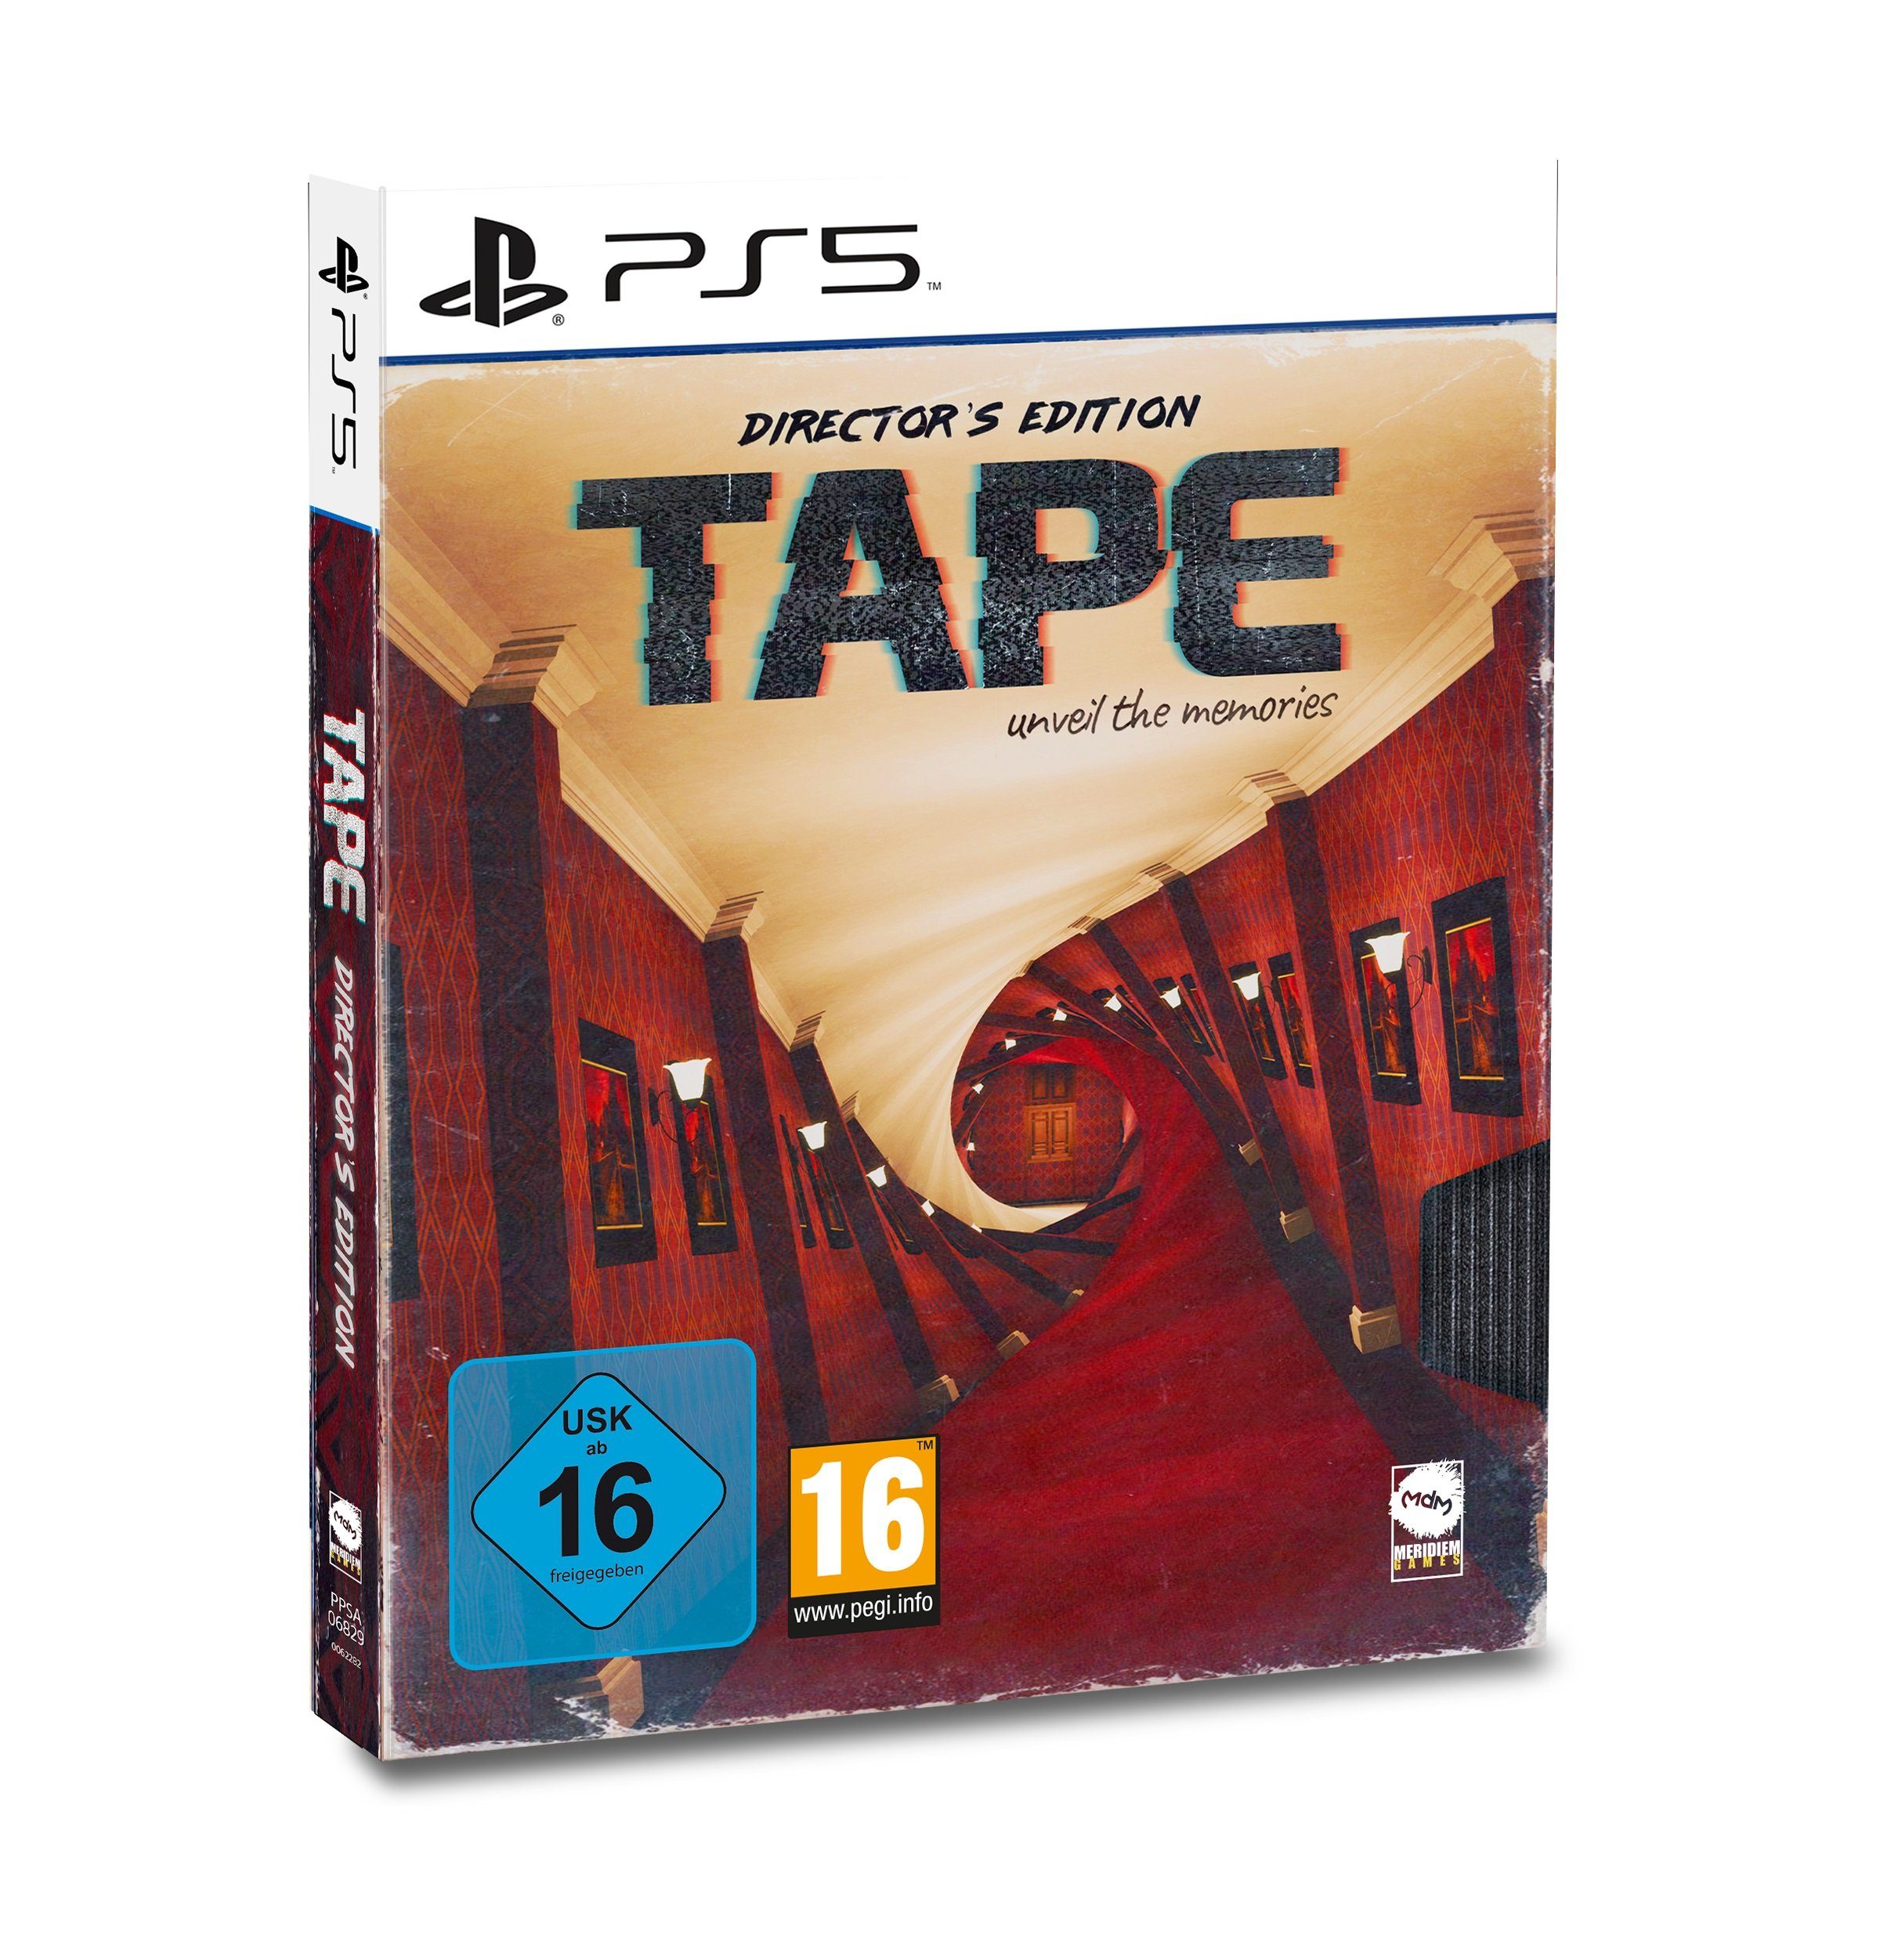 Directors Edition PlayStation TAPE: Unveil the 5 Memories